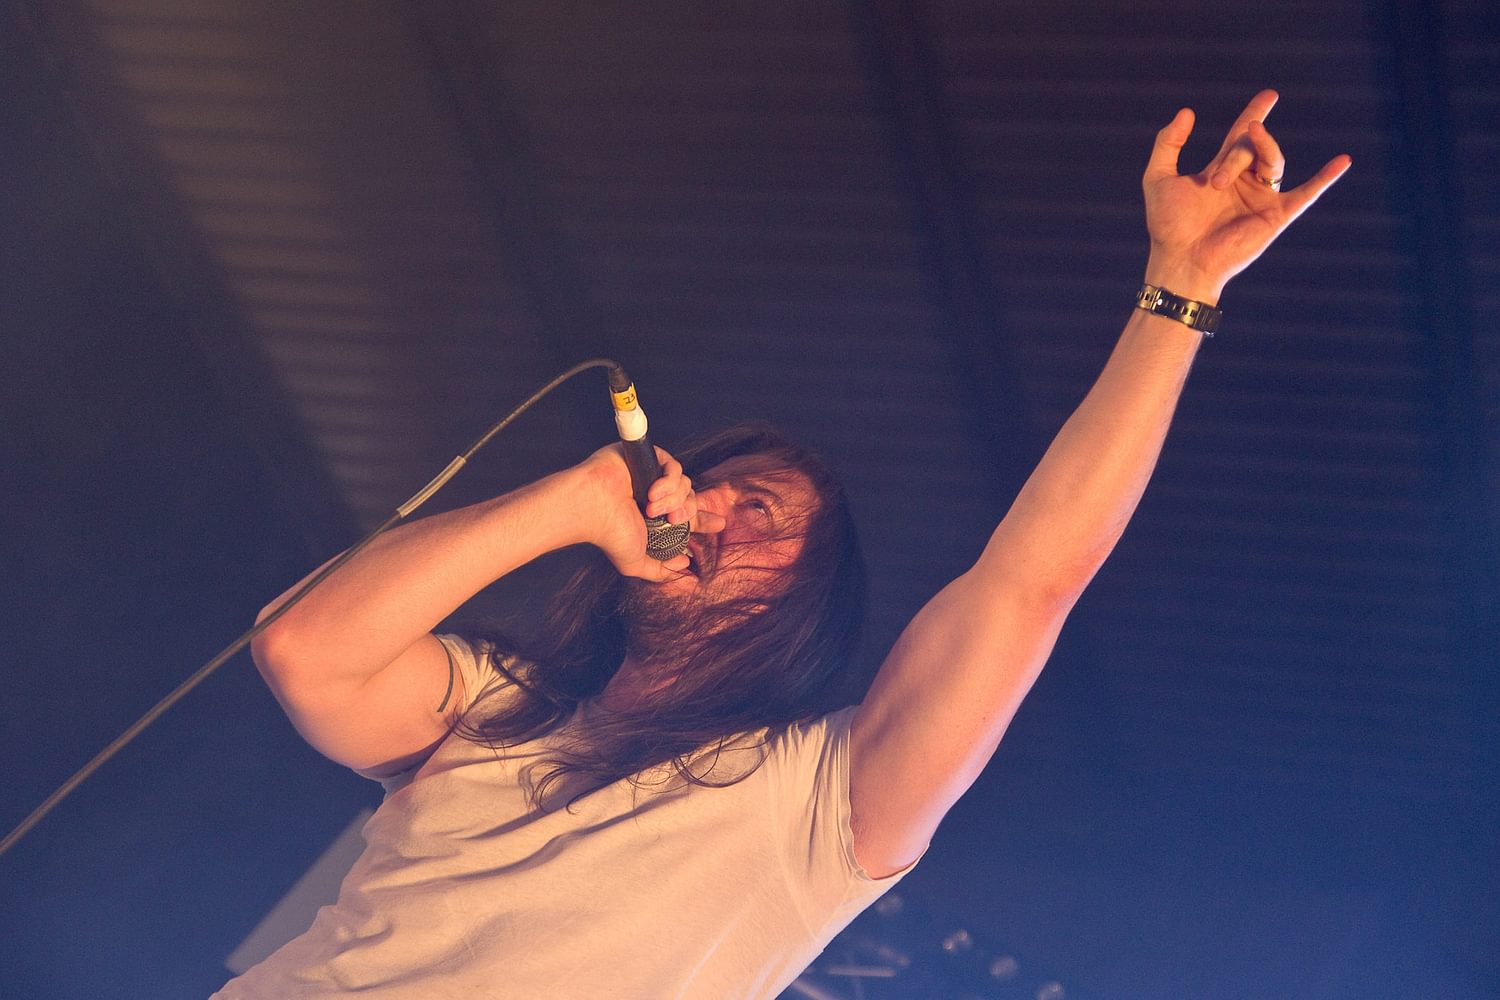 Andrew W.K. signs up for radio show on Glenn Beck’s network